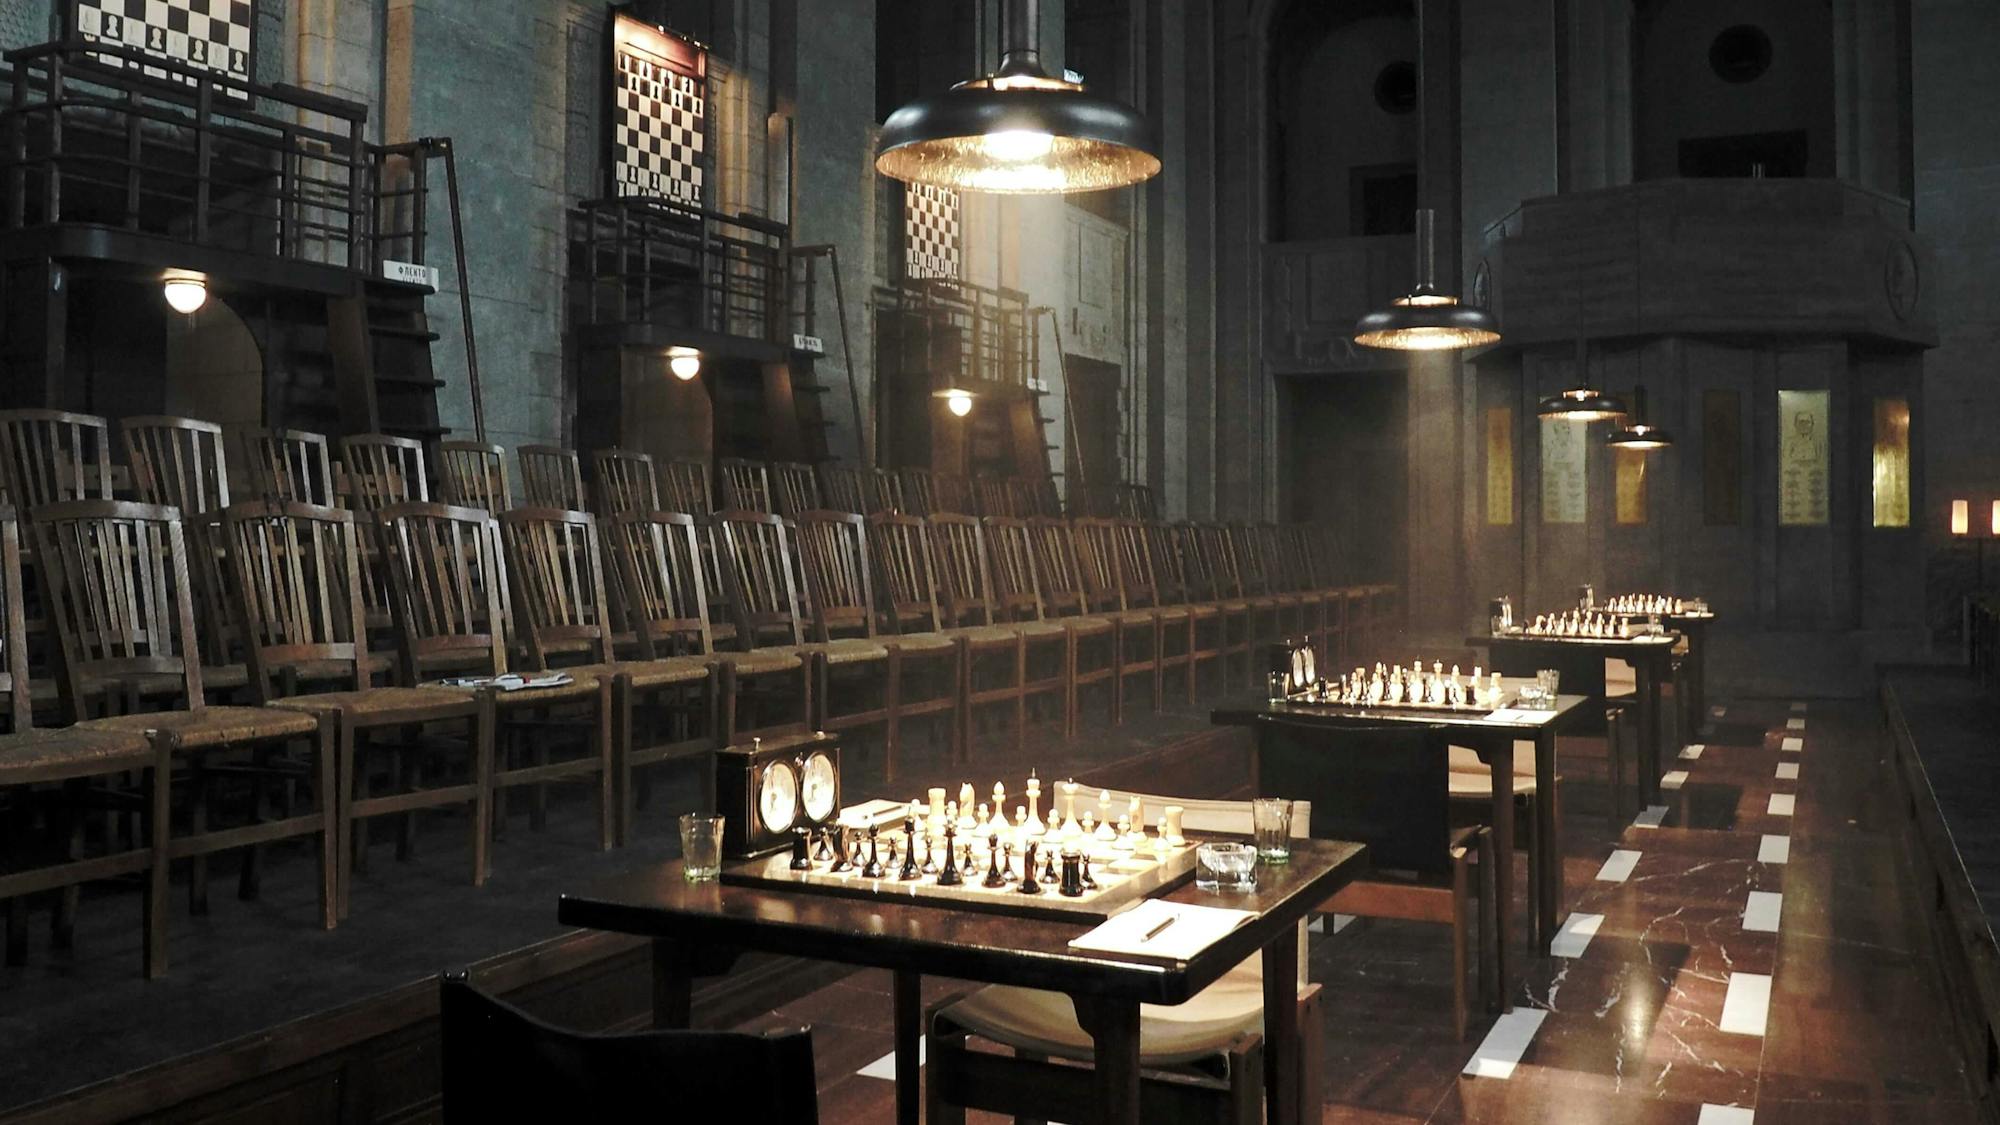 The Moscow chess tournament shot at The “Bear Chamber” in the Bärensaal contains rows of chairs, tables with chess boards and pieces, and shiny wooden floors. The dark scene is lit with overhead chandeliers.